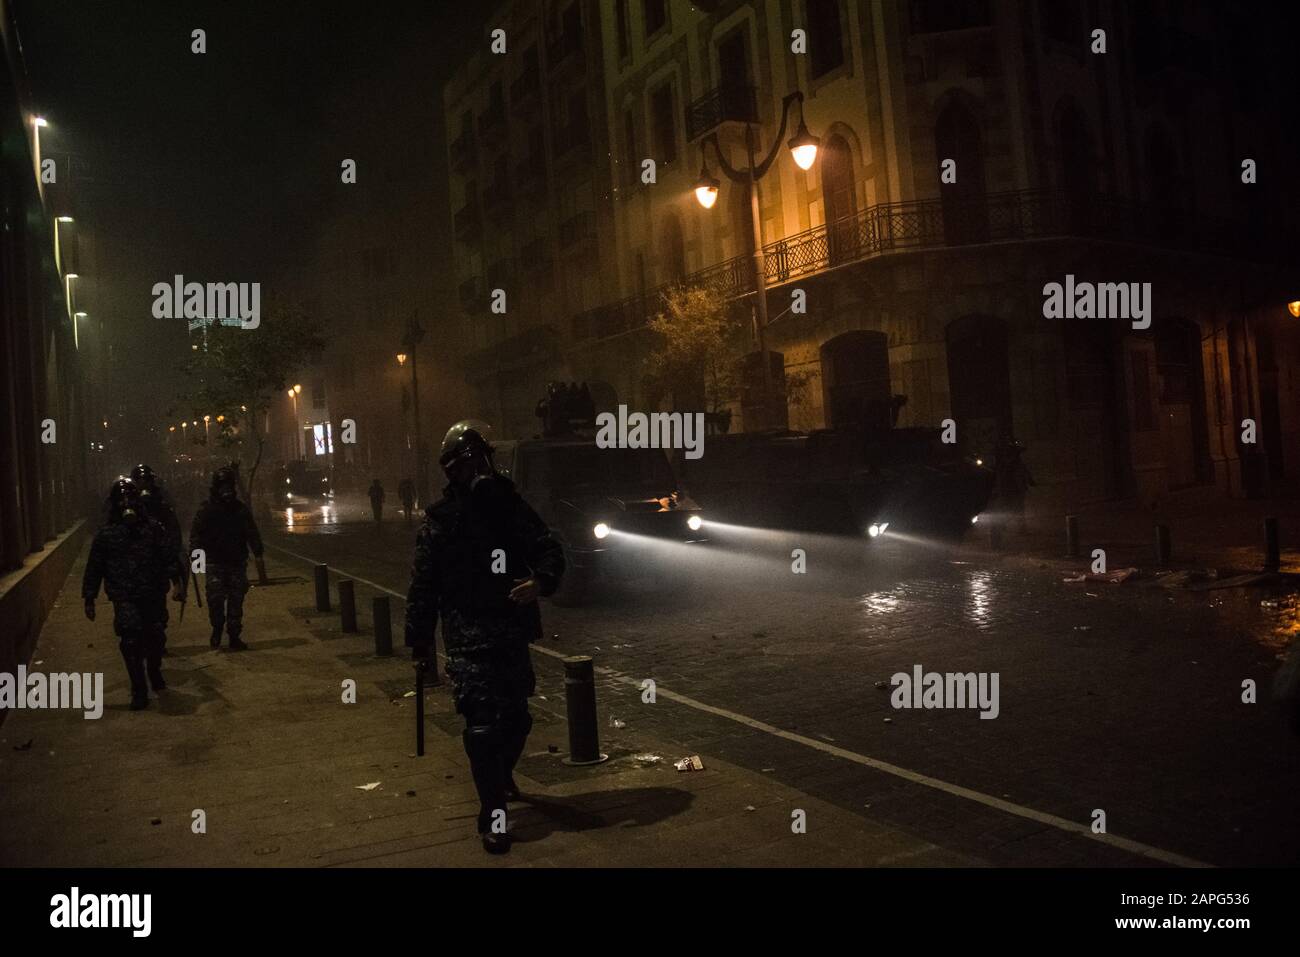 Beirut, Lebanon. 22nd Jan, 2020. Police push back protesters reacting to interim prime minister Hassan Diab's finalisation of a new cabinet for Lebanon, as riots break out in the capital. Credit: Elizabeth Fitt/Alamy Live News Stock Photo